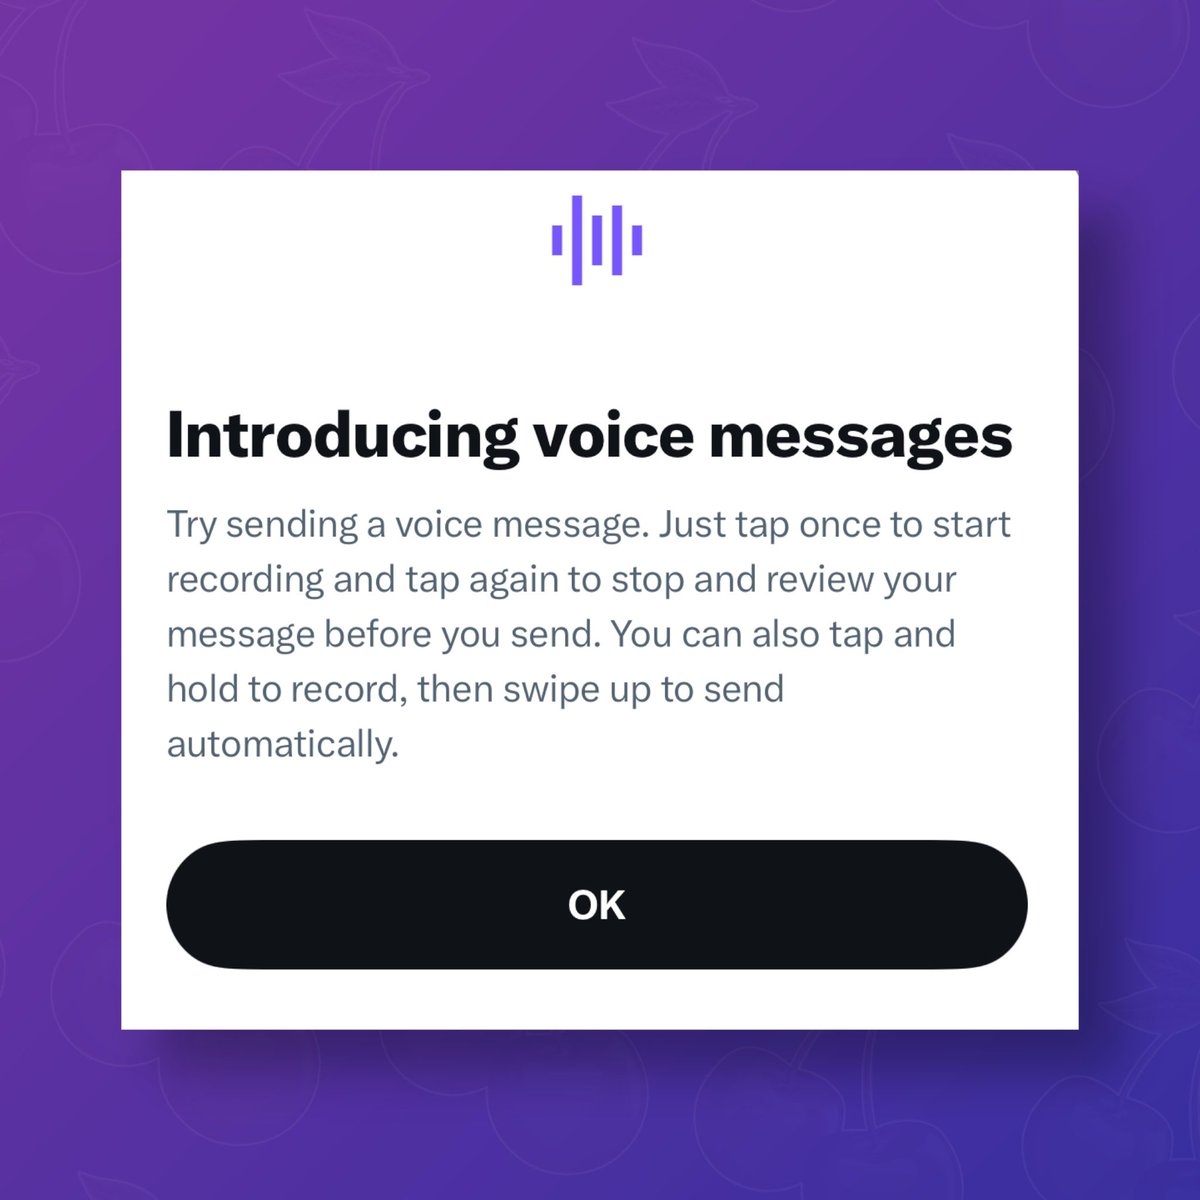 Vxxx90 Vvi13 On Twitter Rt Popbase Voice Messages Are Now